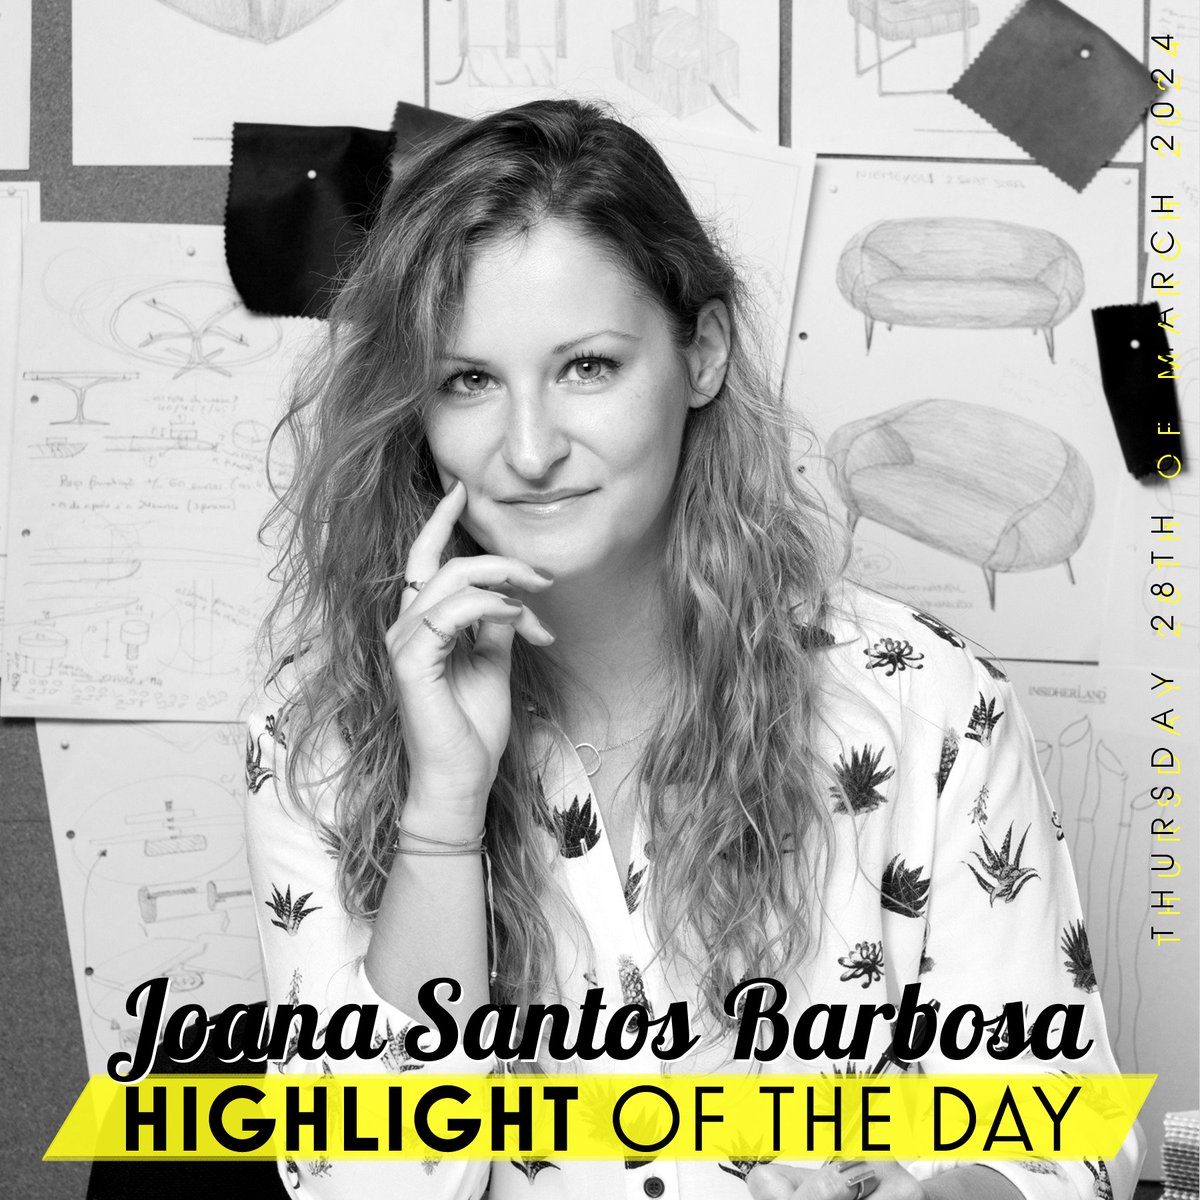 We are pleased to announce Joana Santos Barbosa as the Designer Highlight of the Day on 28 March 2024. Please follow Joana Santos Barbosa's social media accounts here: designerhighlights.com/?328977 #adesignaward #adesigncompetition #designerhighlights